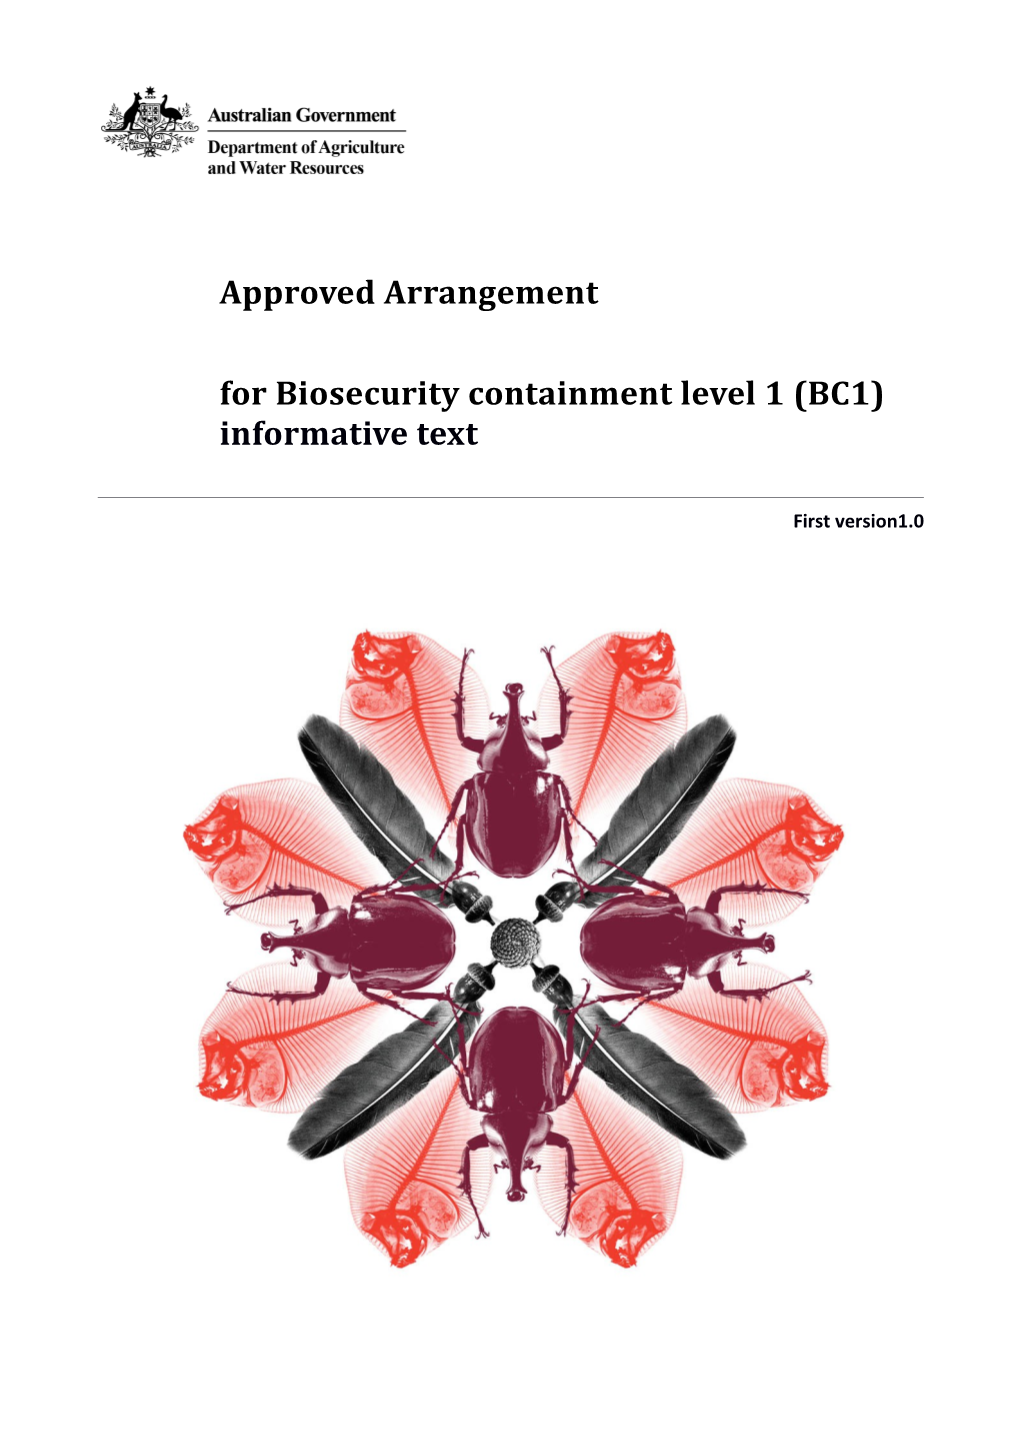 For Biosecurity Containment Level 1 (BC1) Informative Text